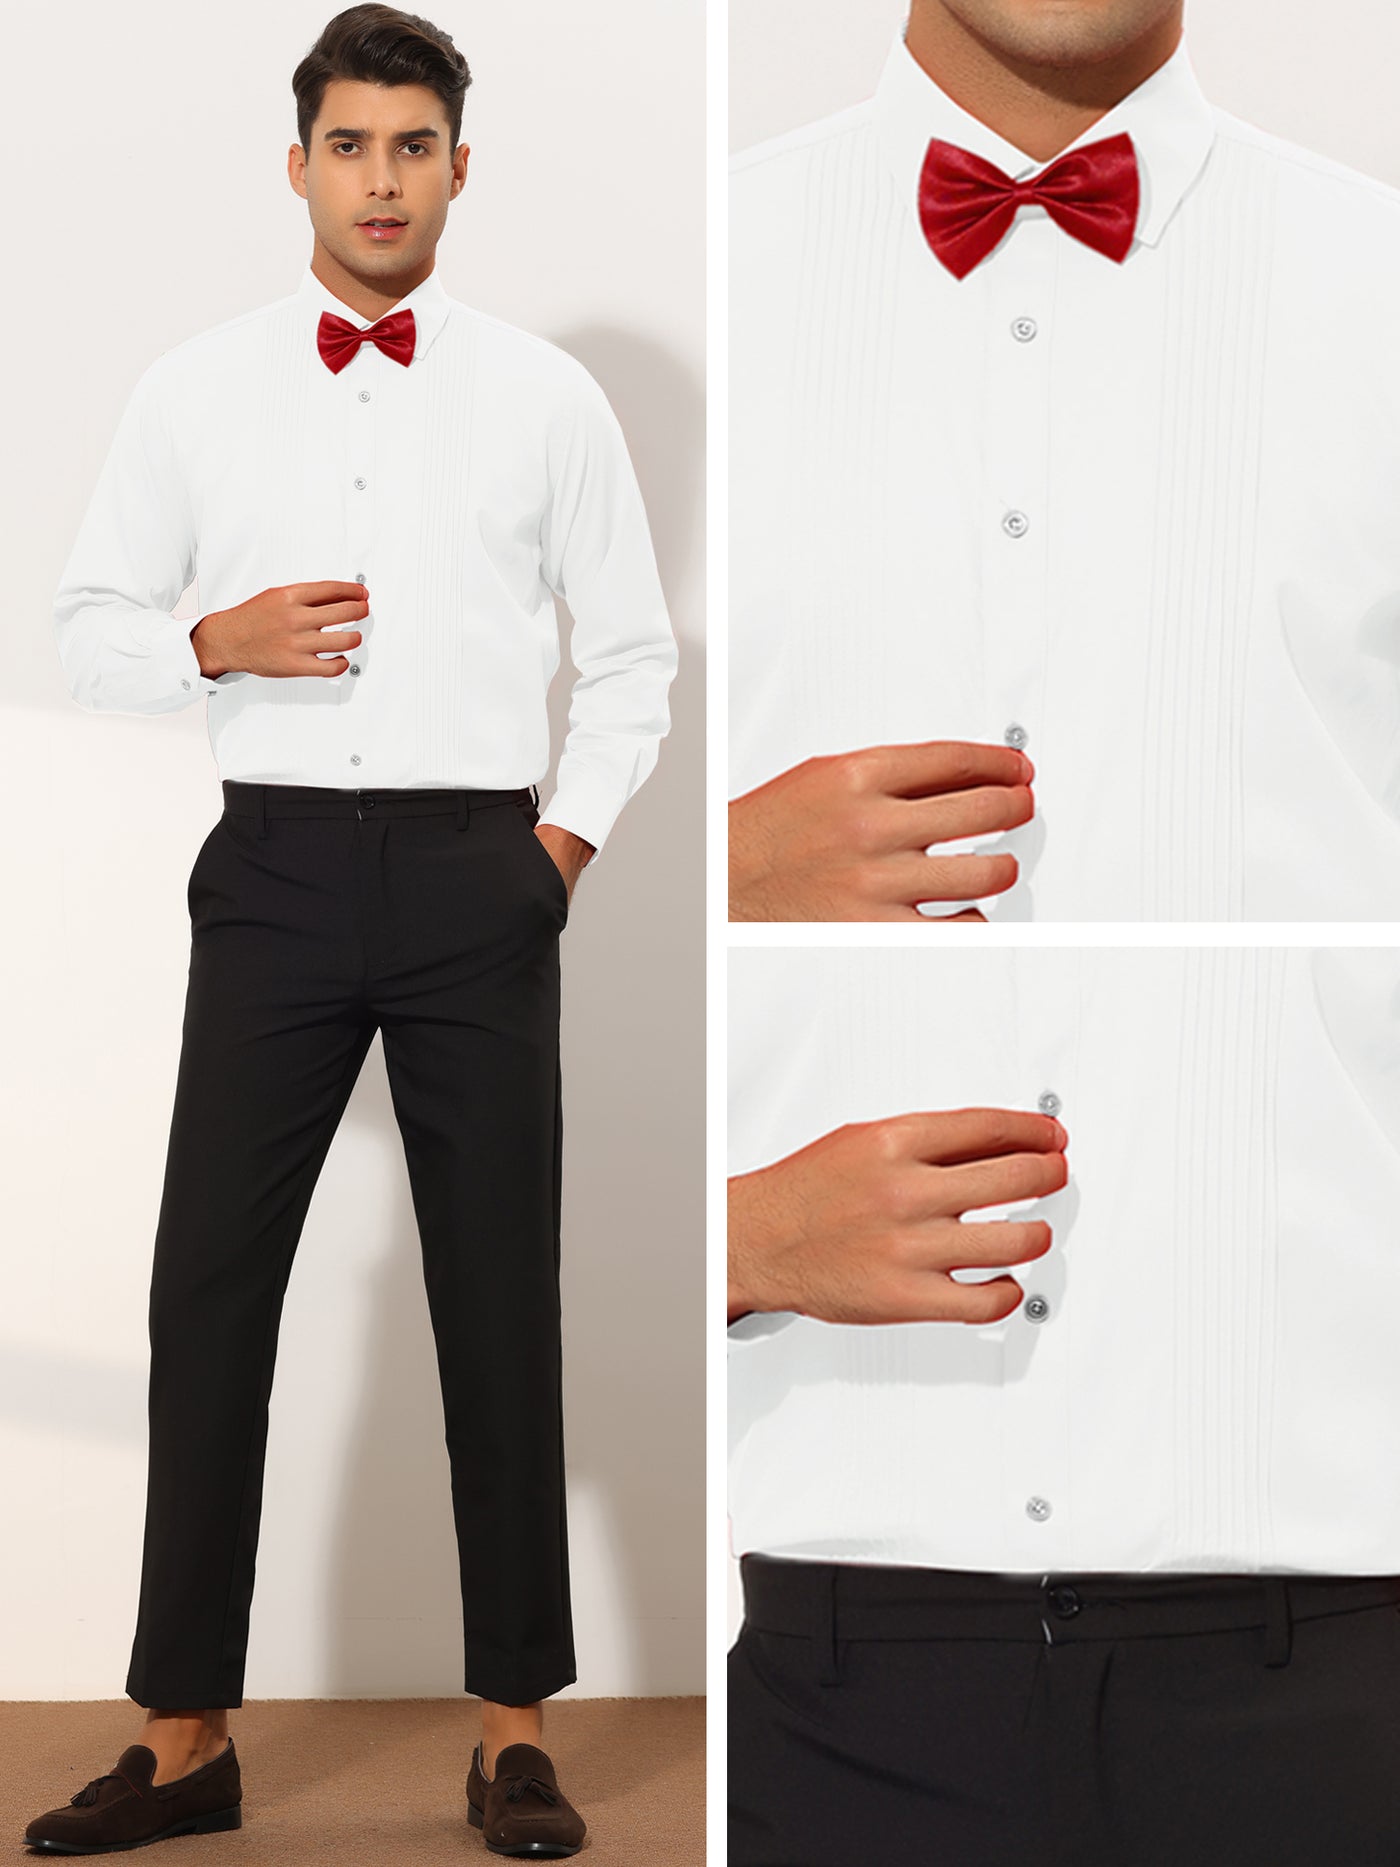 Bublédon Men's Tuxedo Slim Fit Solid Long Sleeves Prom Dress Shirts with Bow Tie